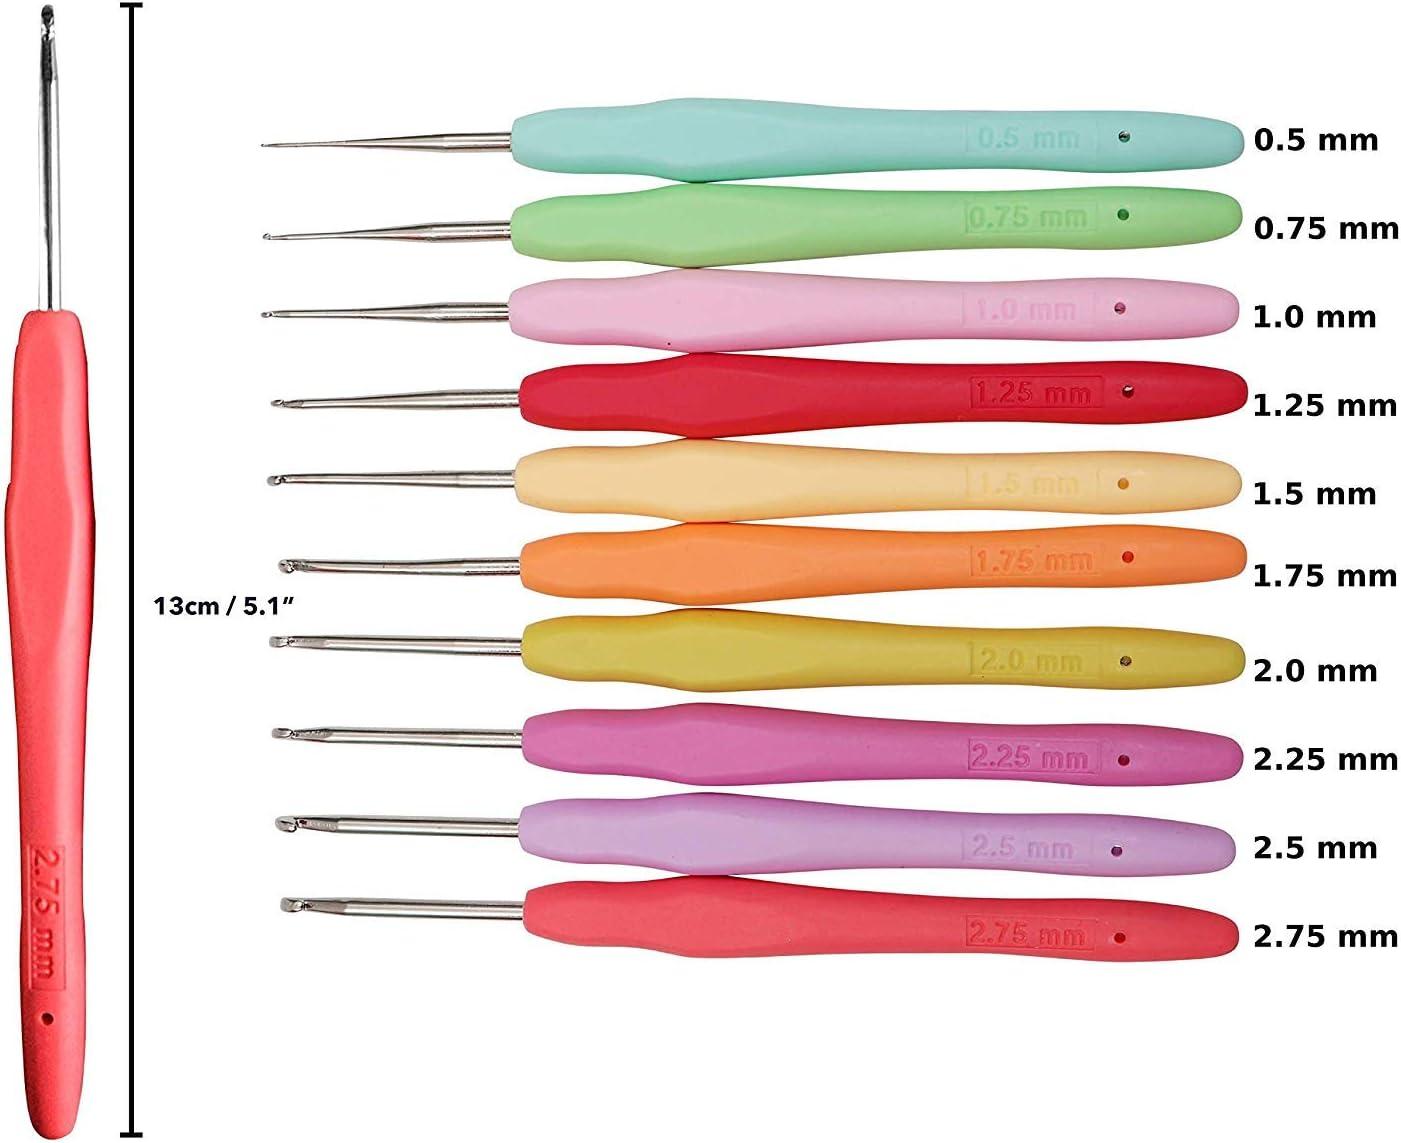 Crochet Hooks Manufacturers, Suppliers, Dealers & Prices